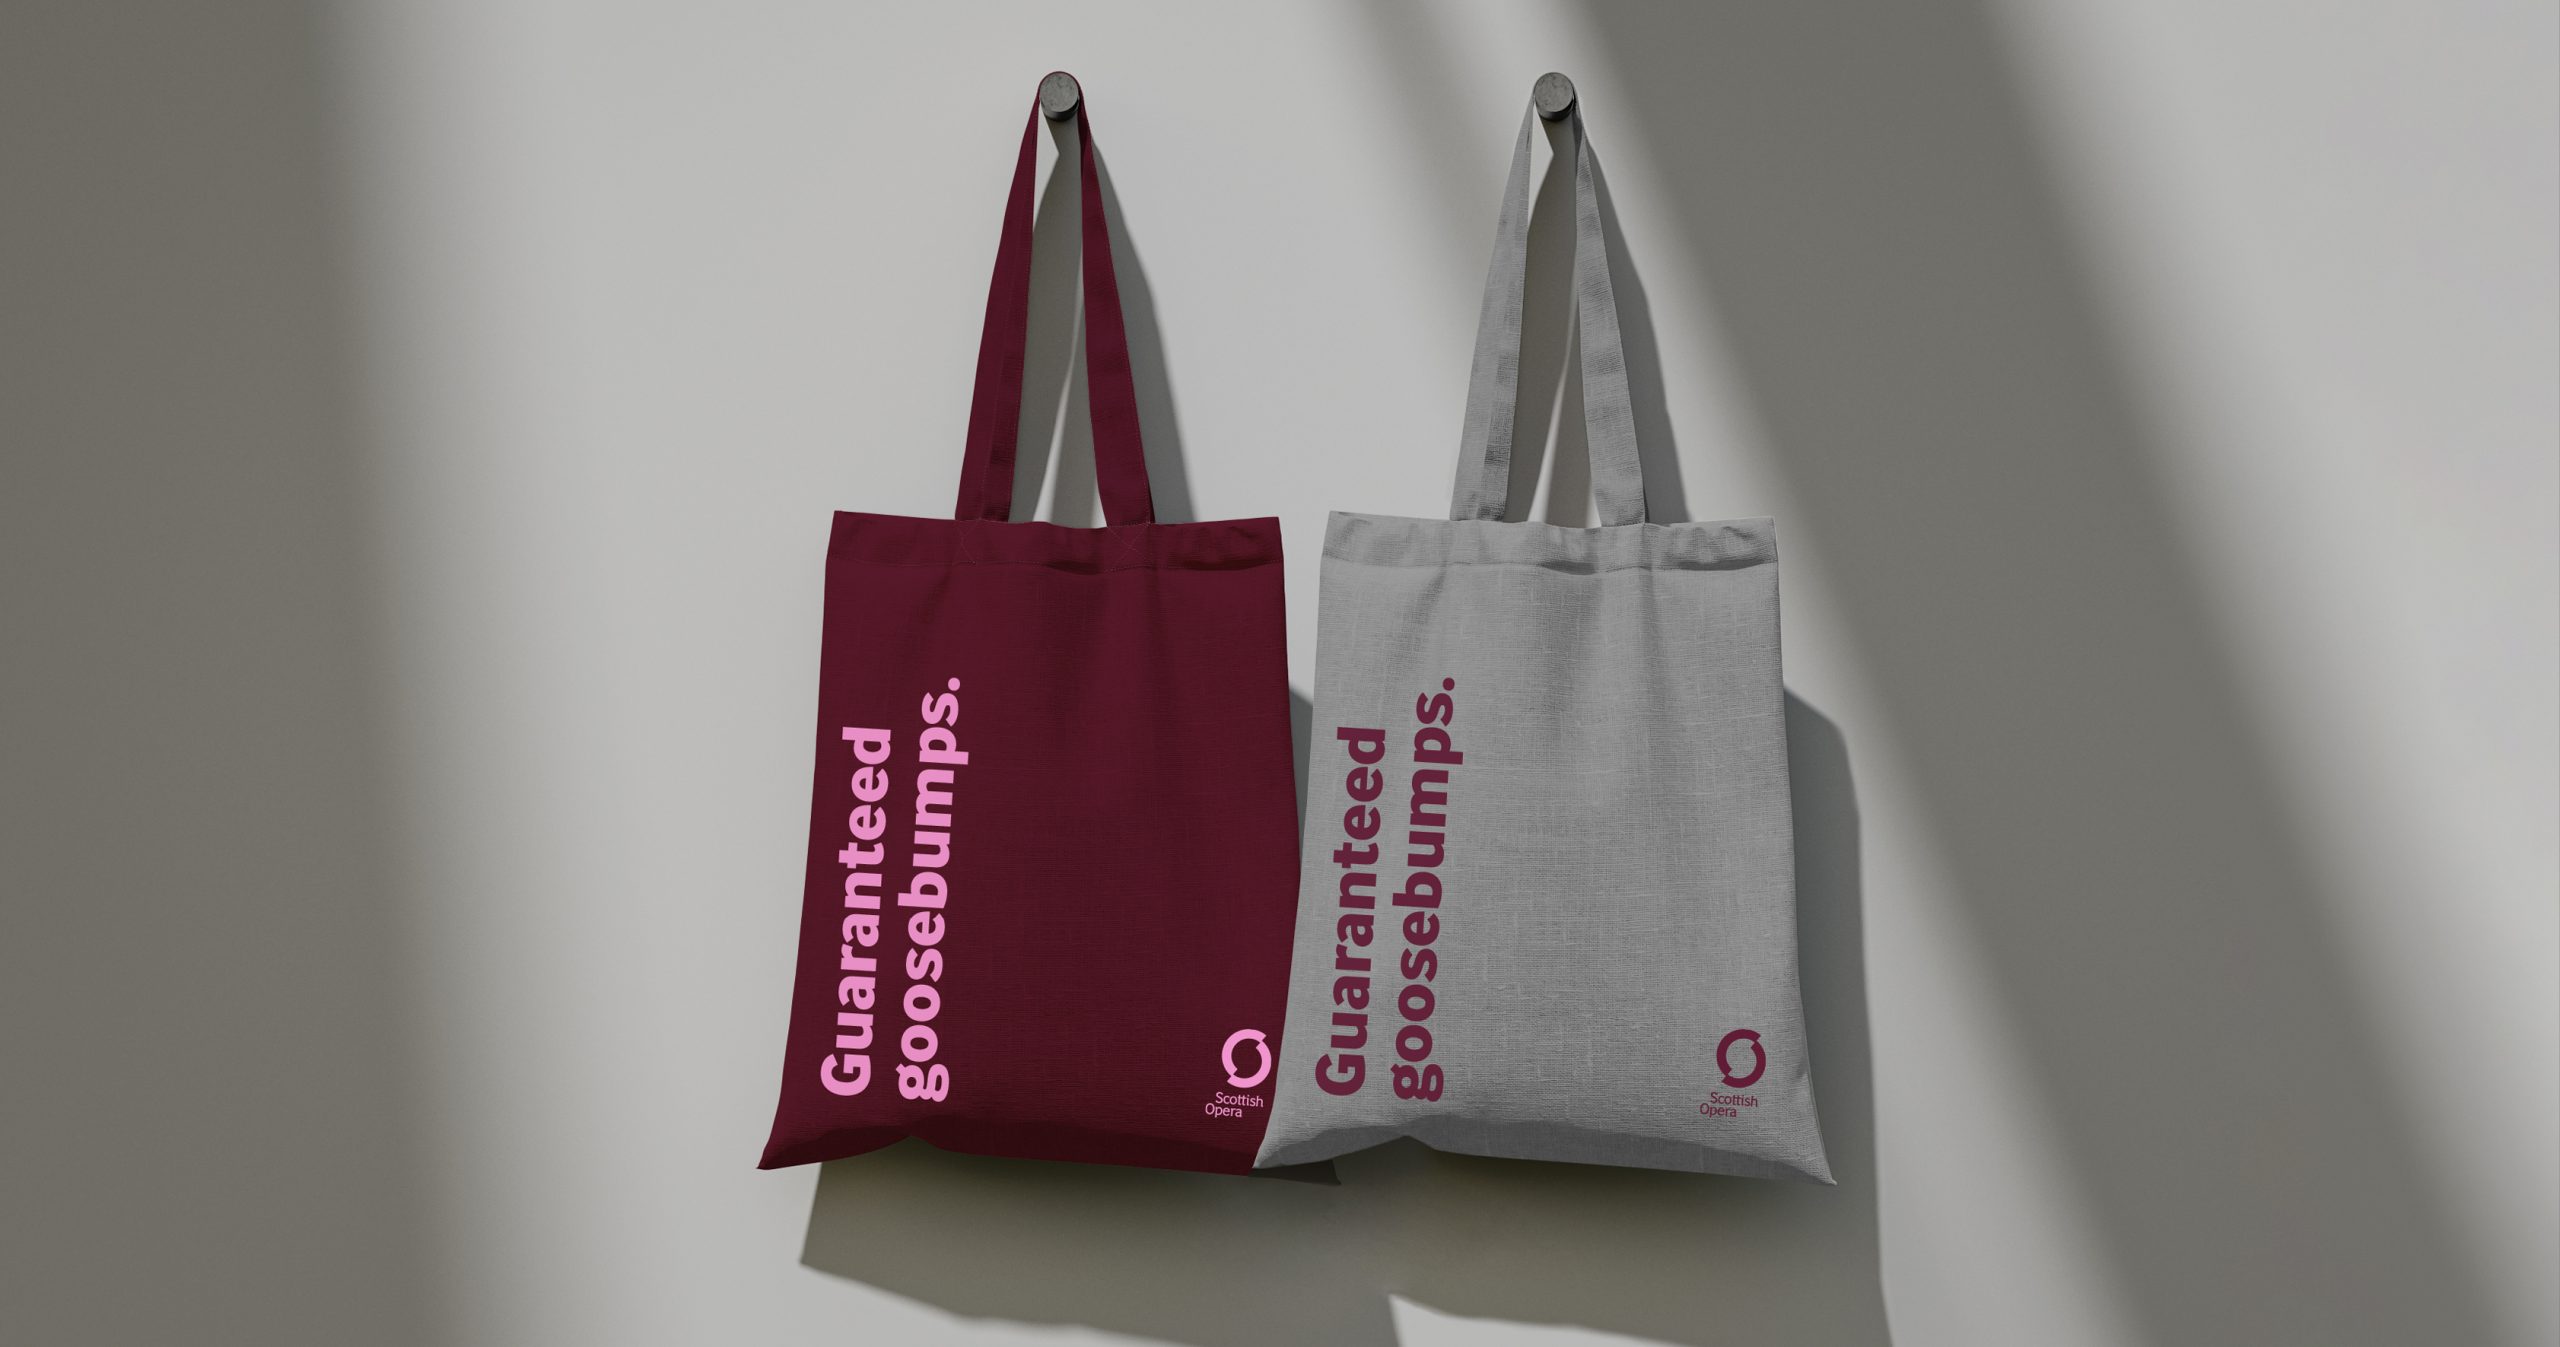 Two Scottish Opera branded tote bags in burgundy and grey, printed with the words 'Guaranteed goosebumps' on them.